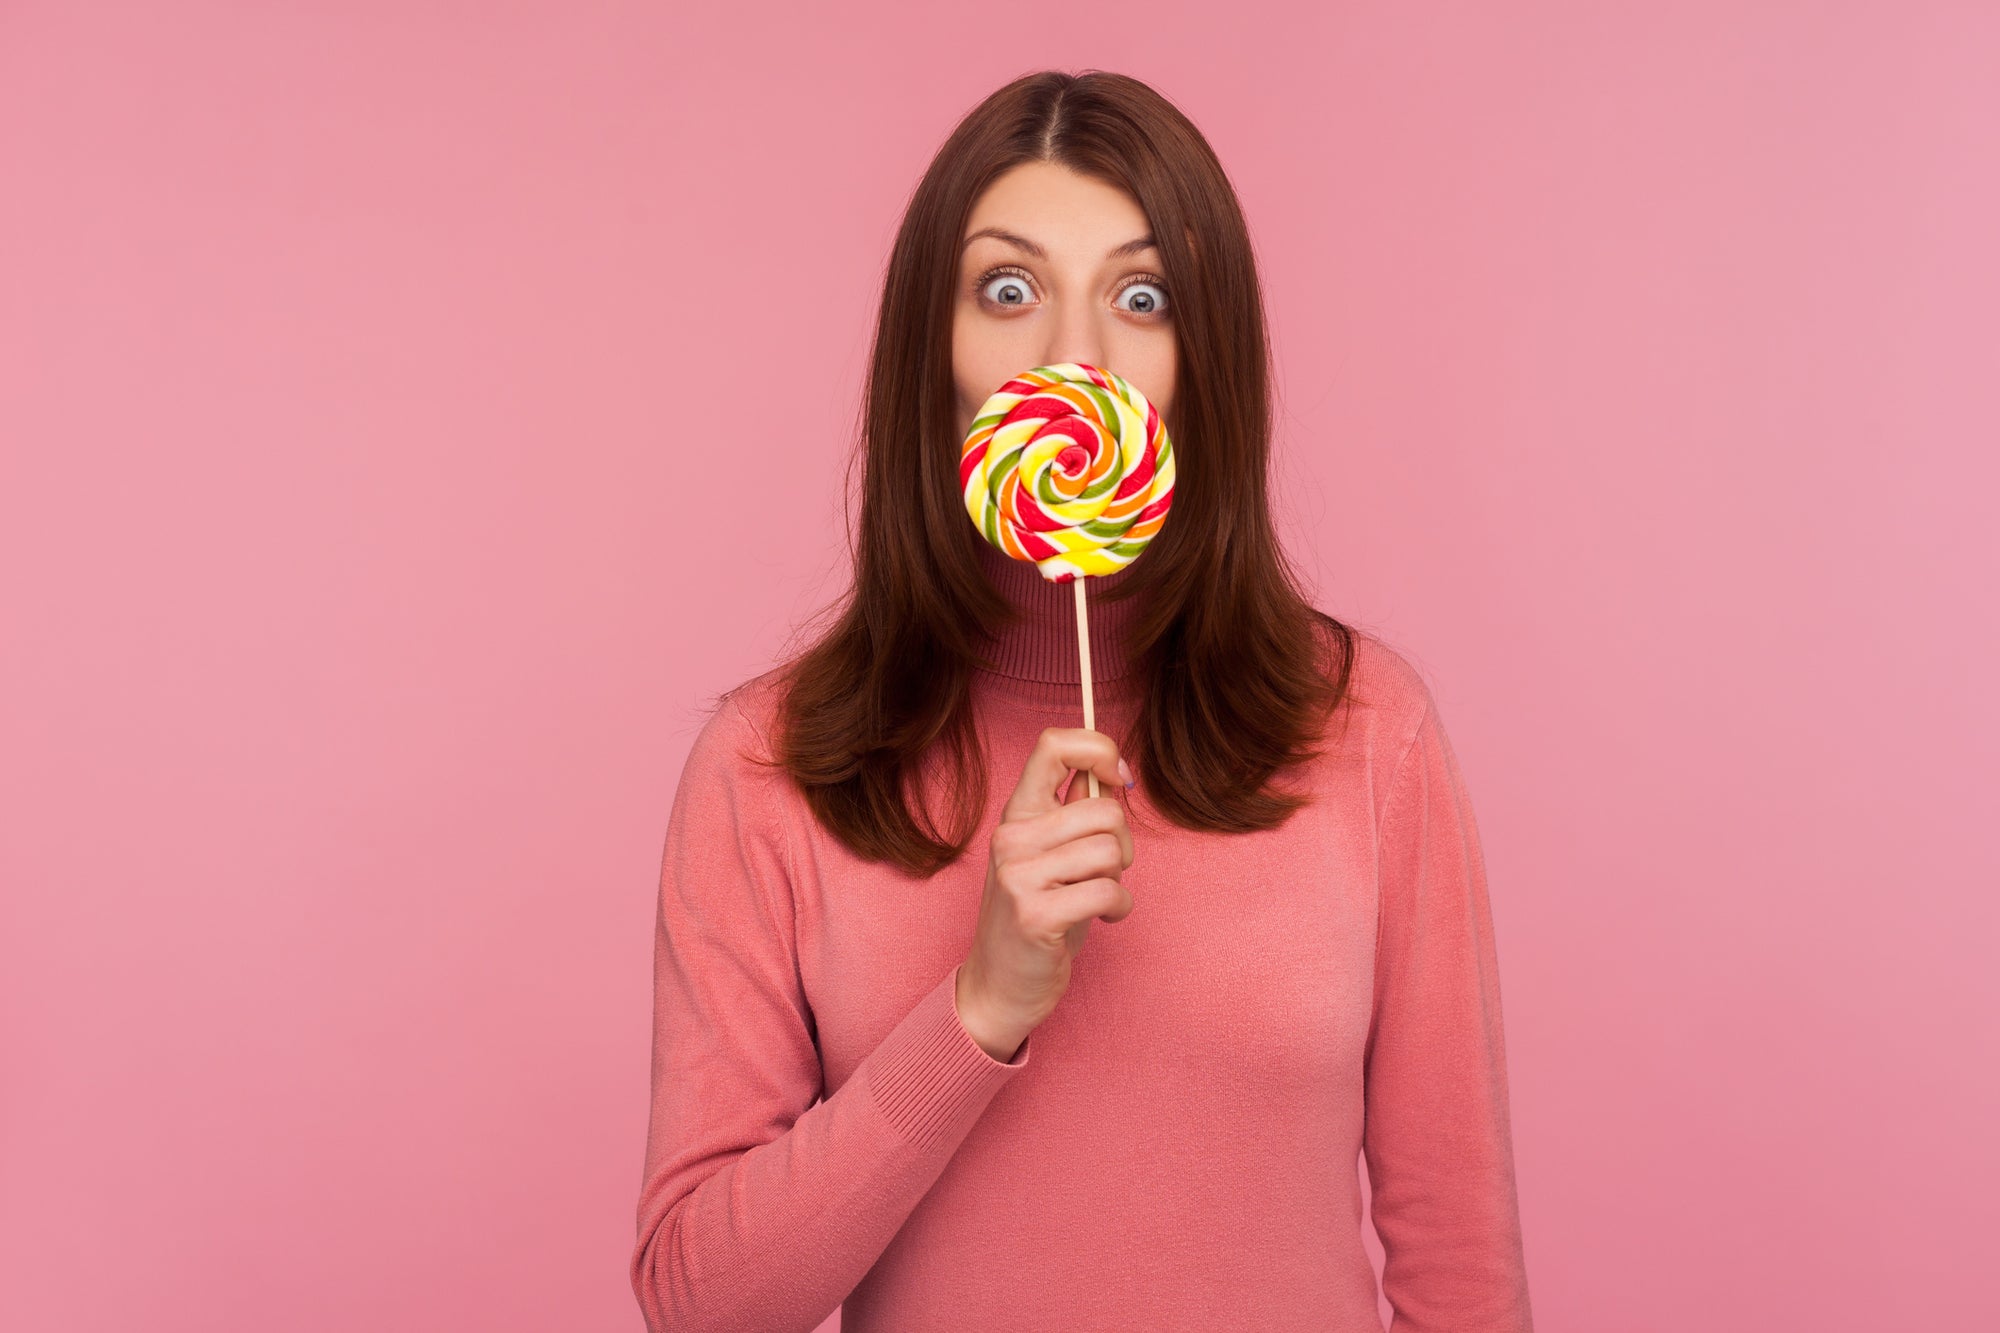 Woman in a pink sweater holding a rainbow lollipop